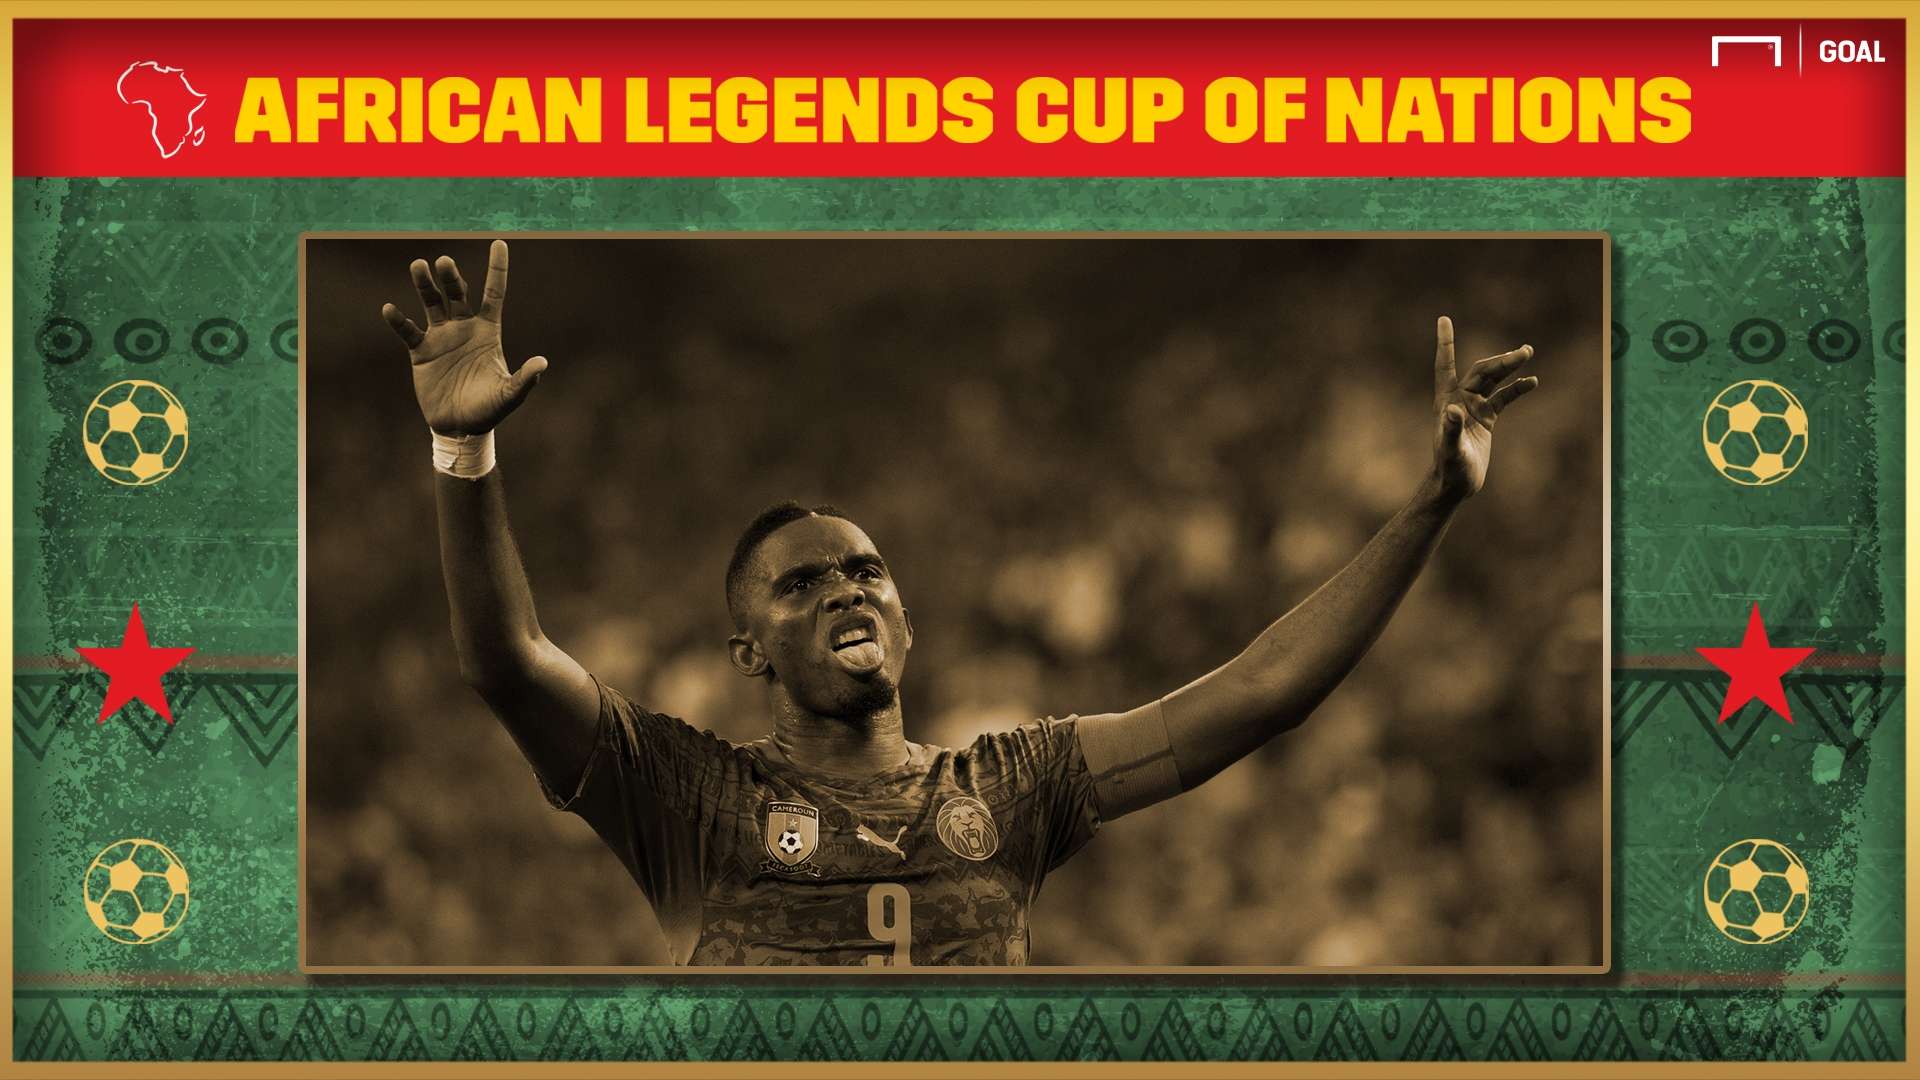 African Legends Cup of Nations: Eto'o